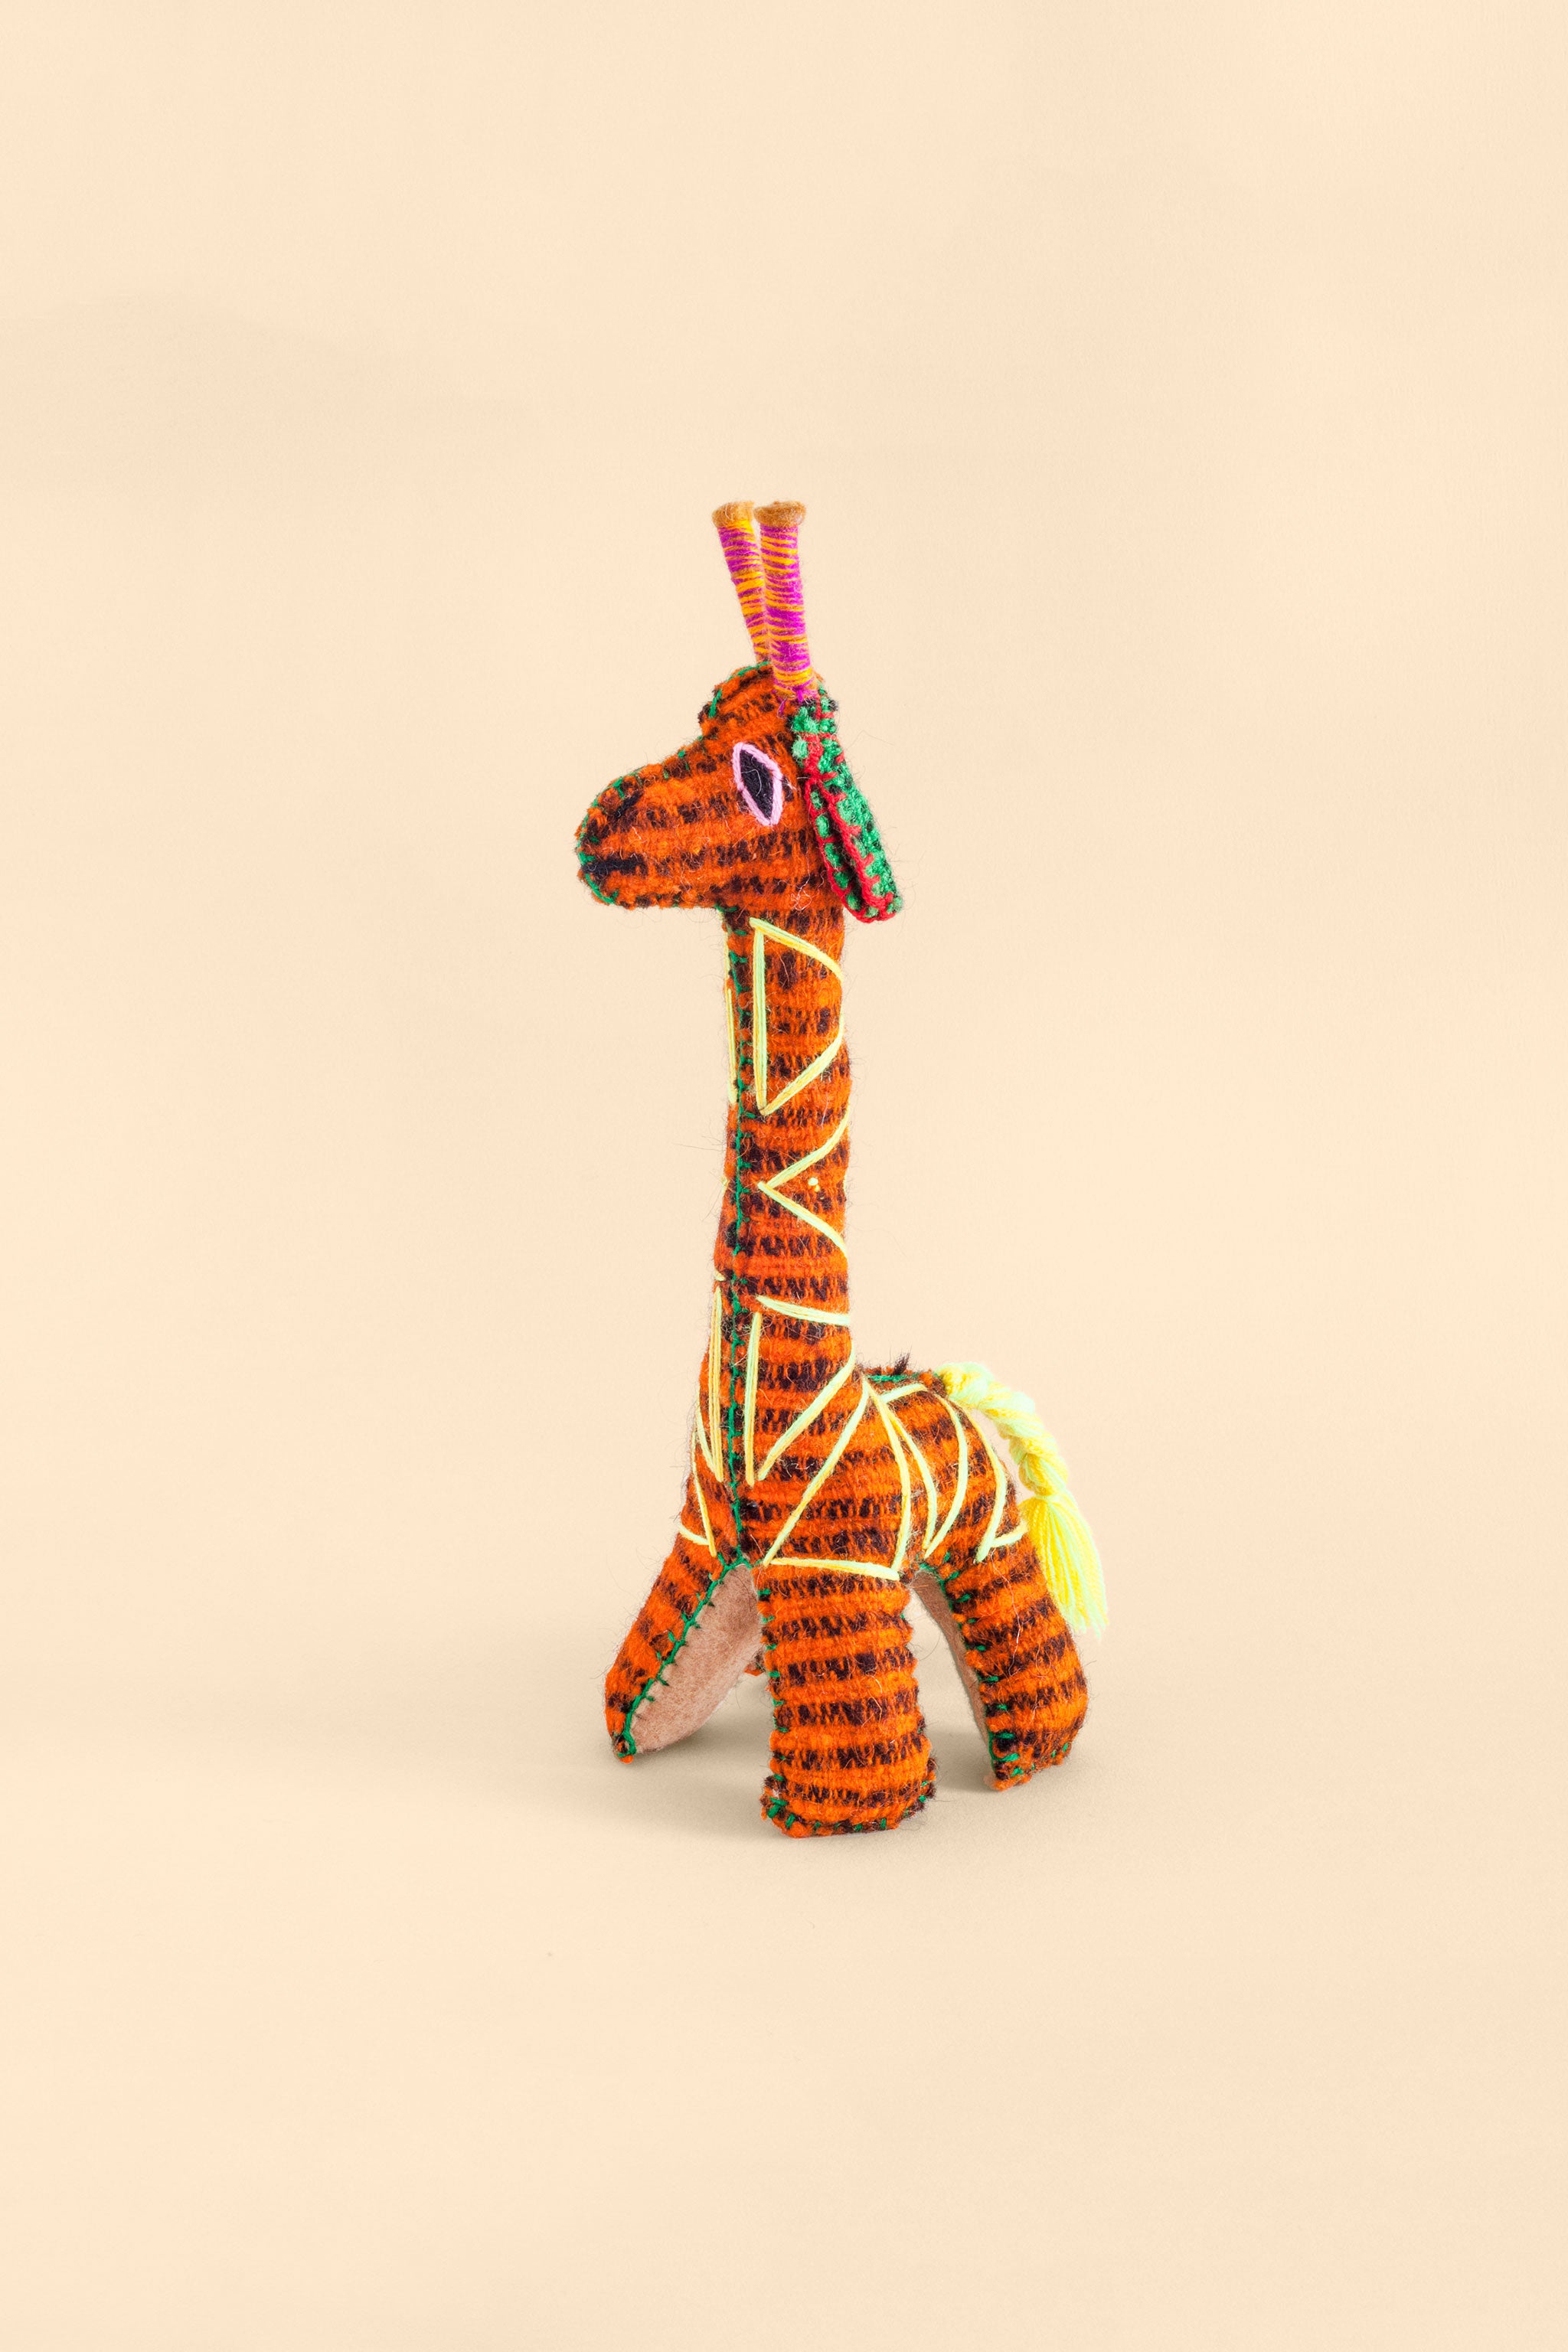 Colorful felt giraffe plush toy with hand embroidered features and triangle designs.